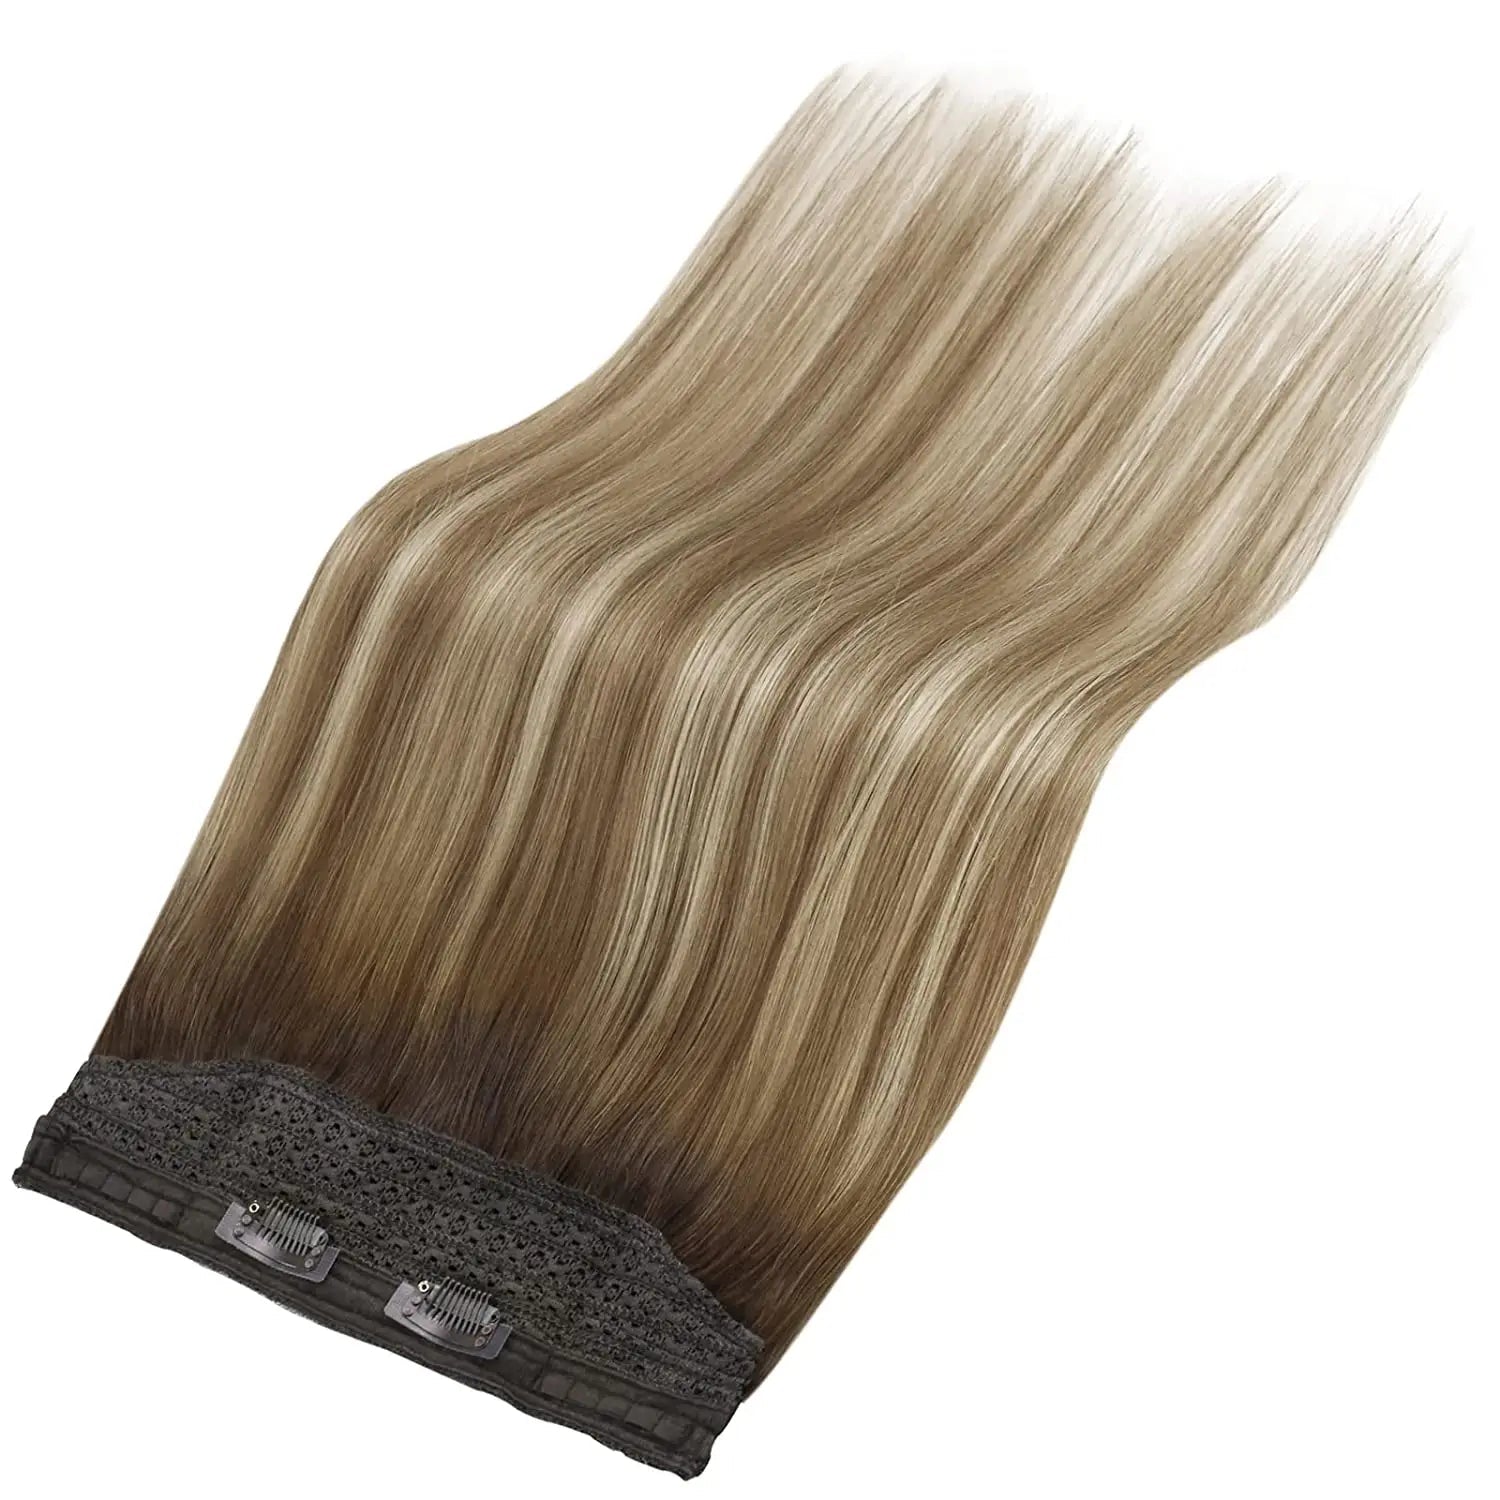 Halo Human Hair Extensions: Elevate Your Glamour Instantly!